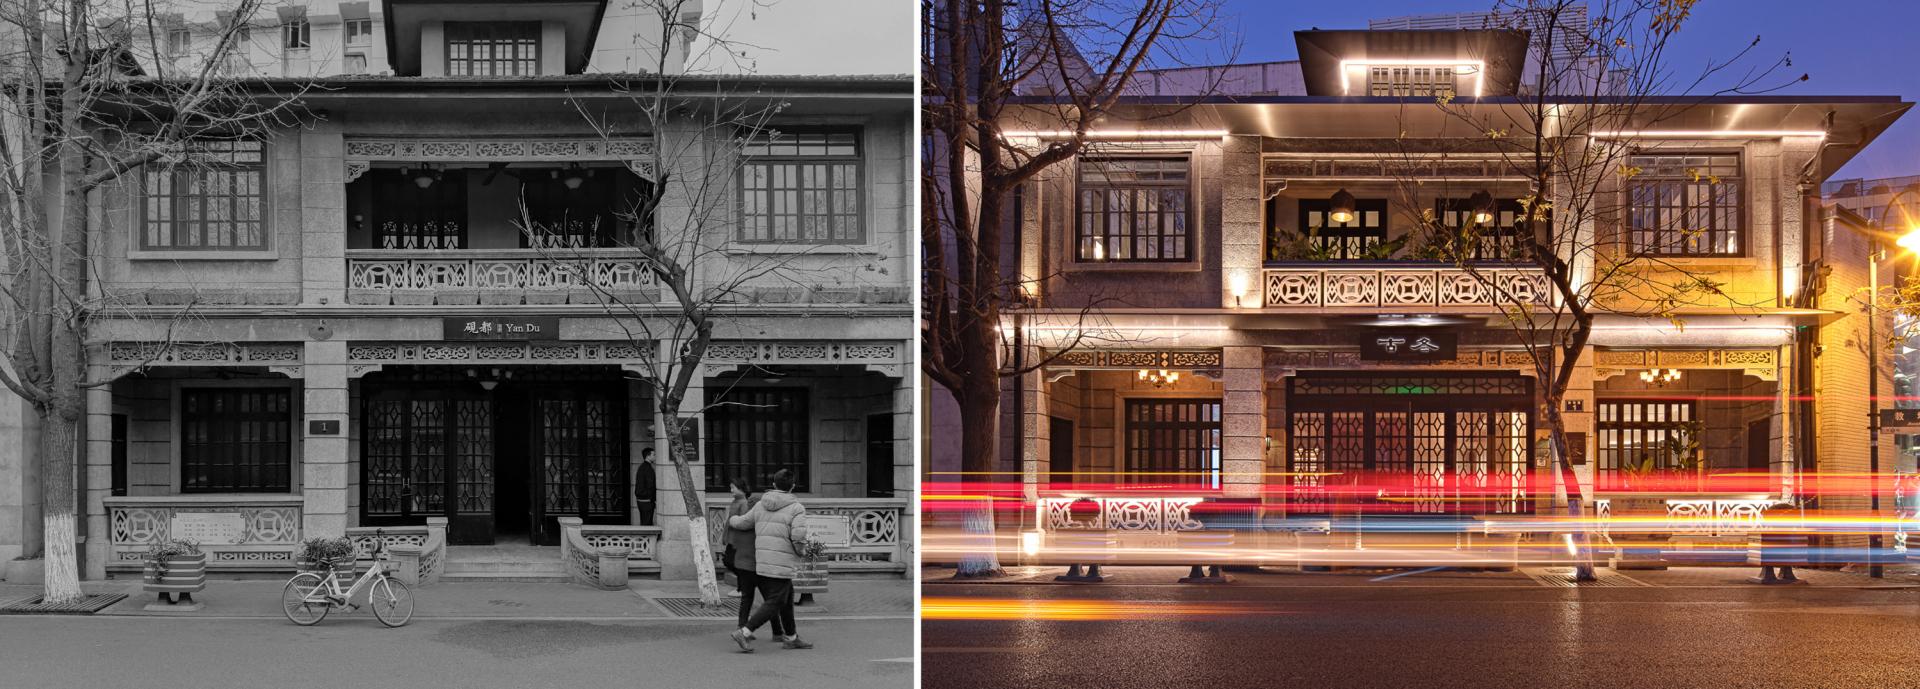 A Former Historic Villa is Turned Into a Modern Hotpot Restaurant in China